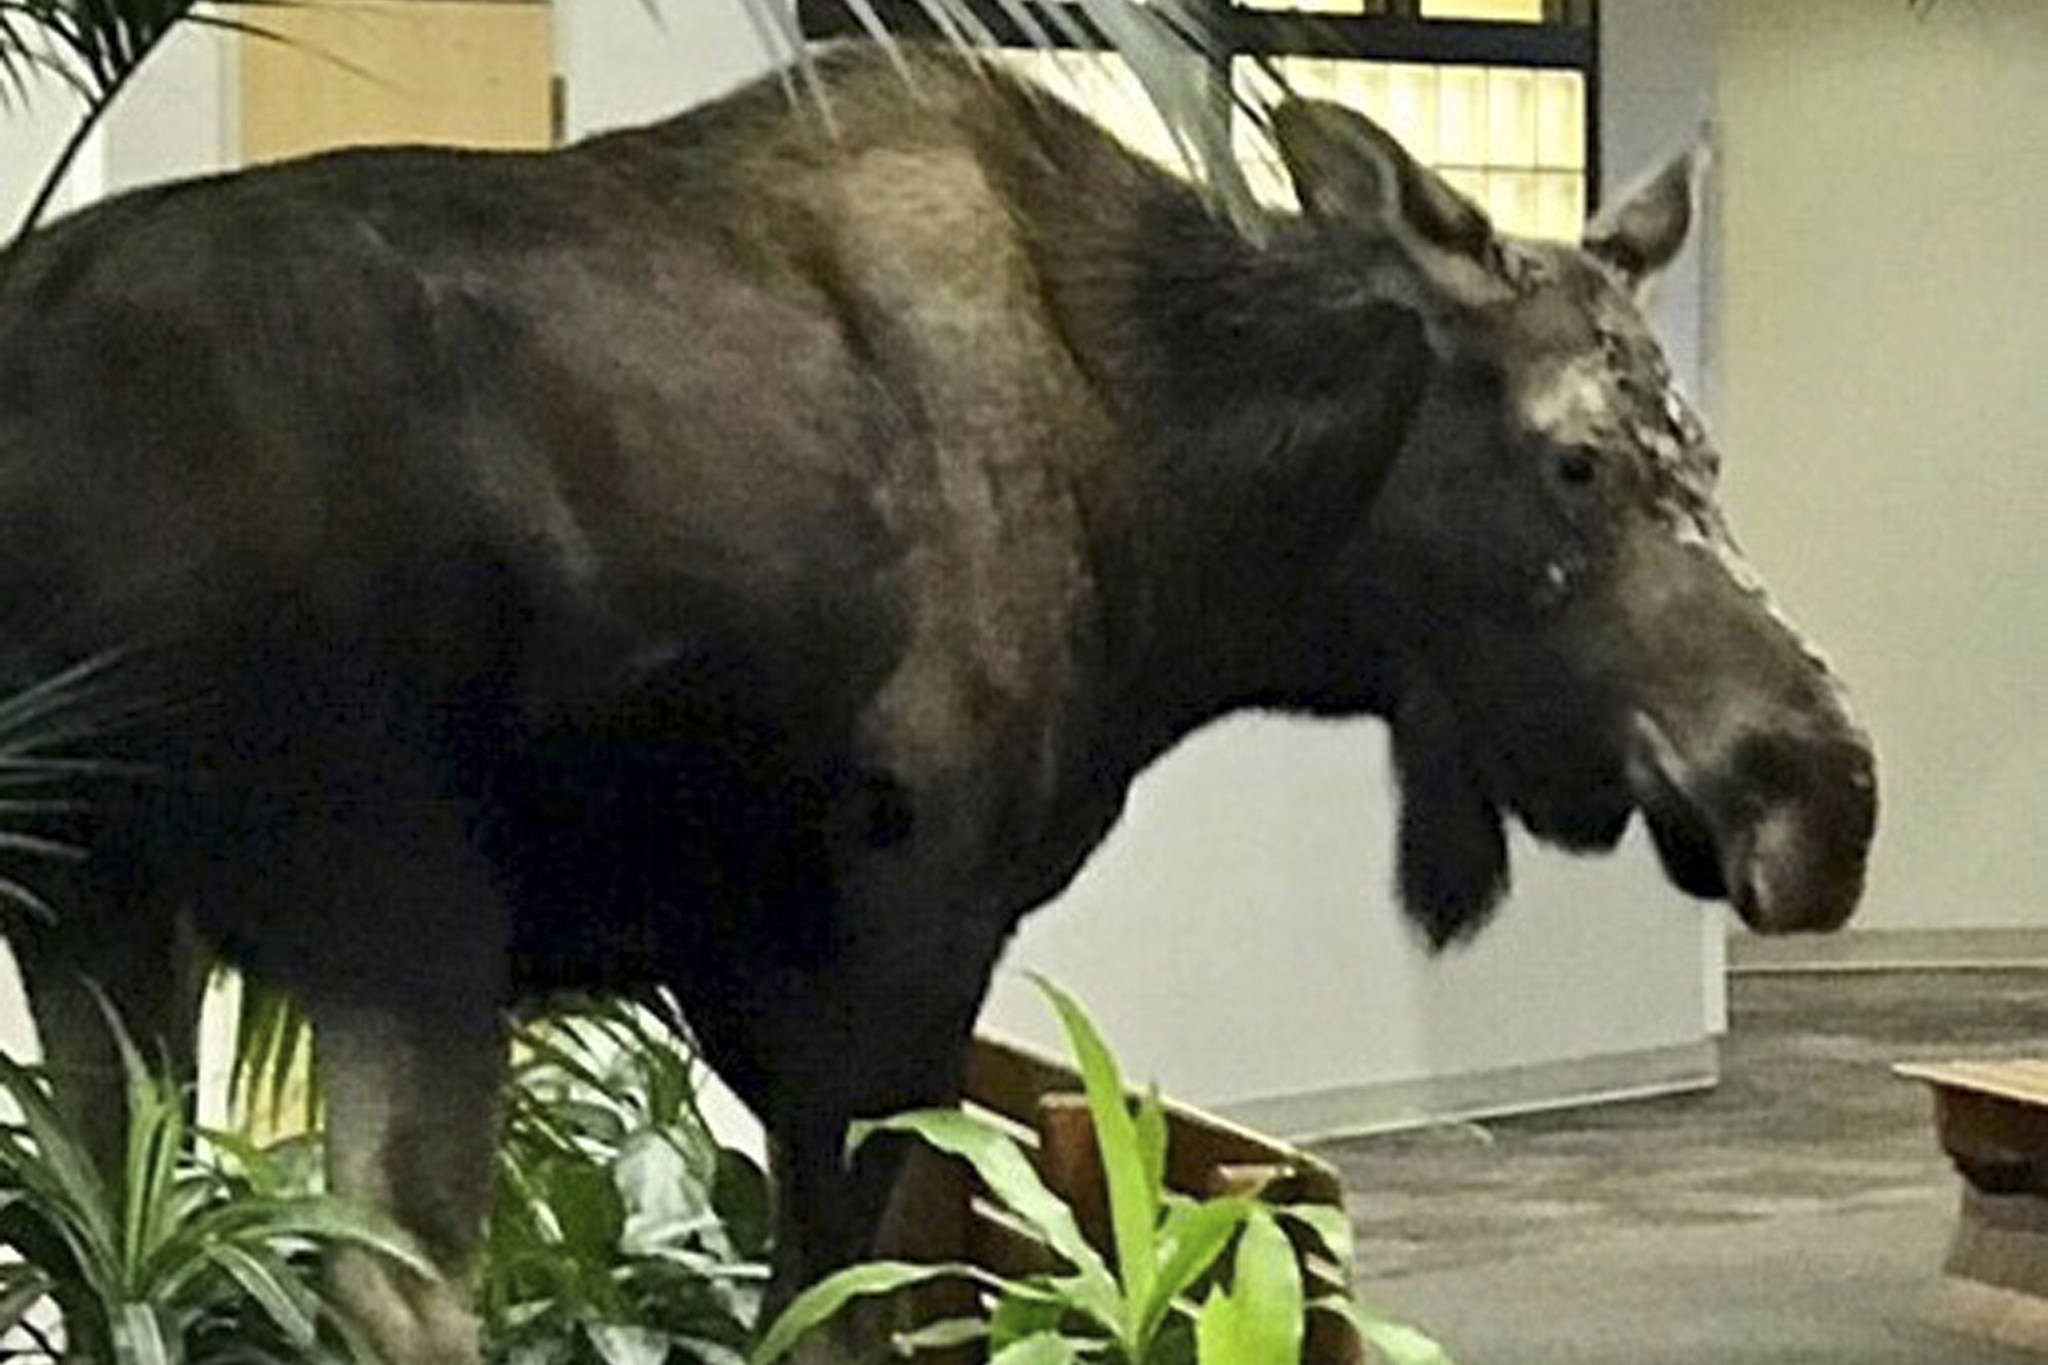 A moose walks into an Anchorage hospital, finds a snack